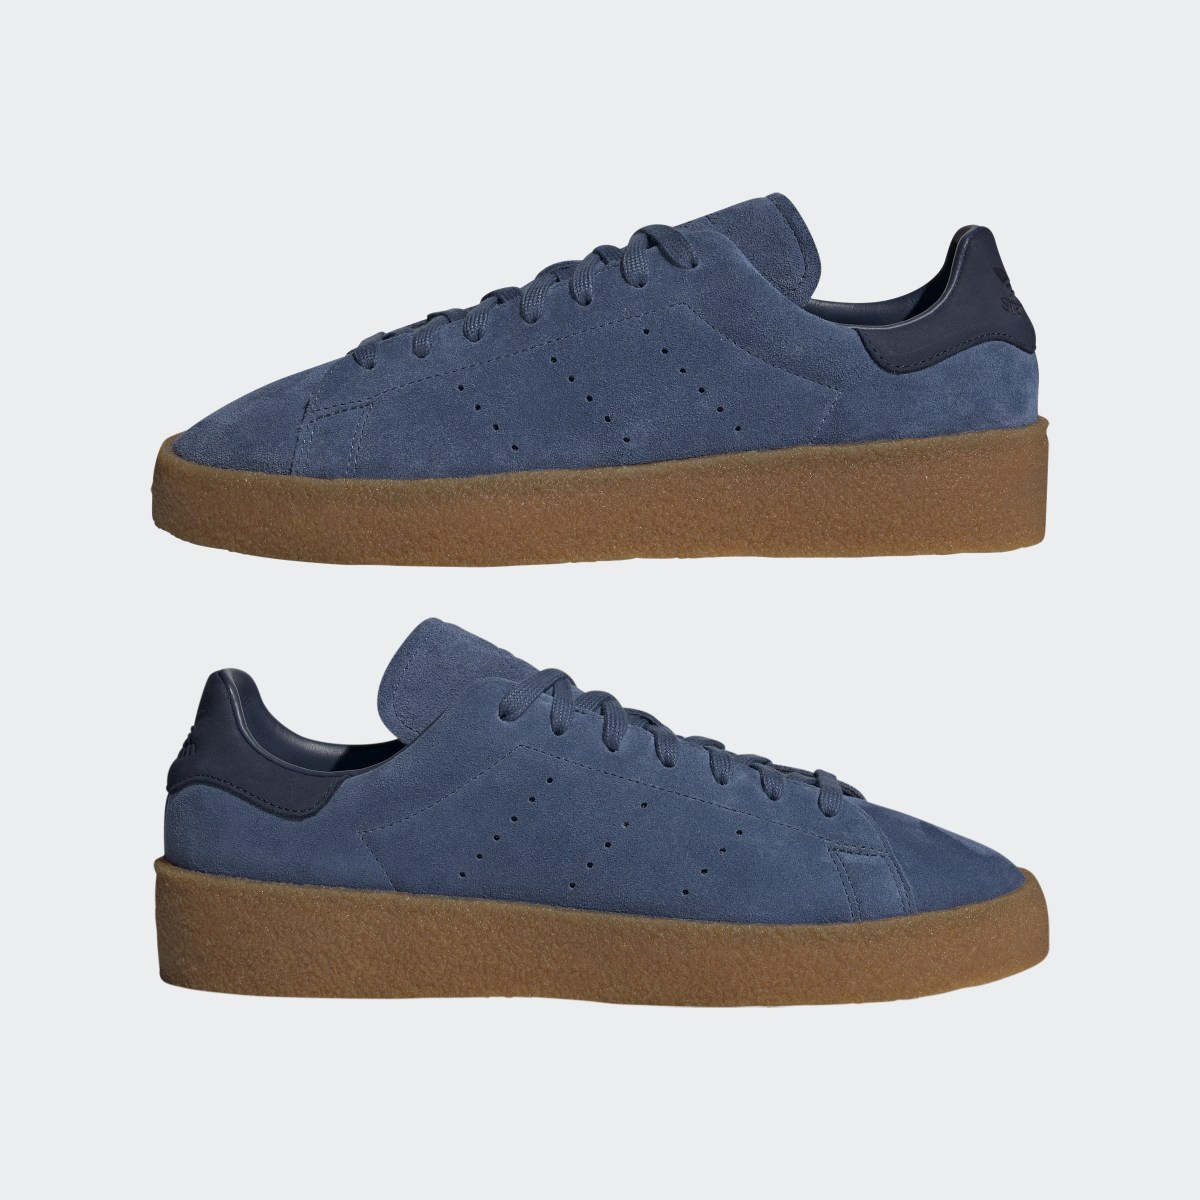 Adidas Stan Smith Crepe Shoes. 8